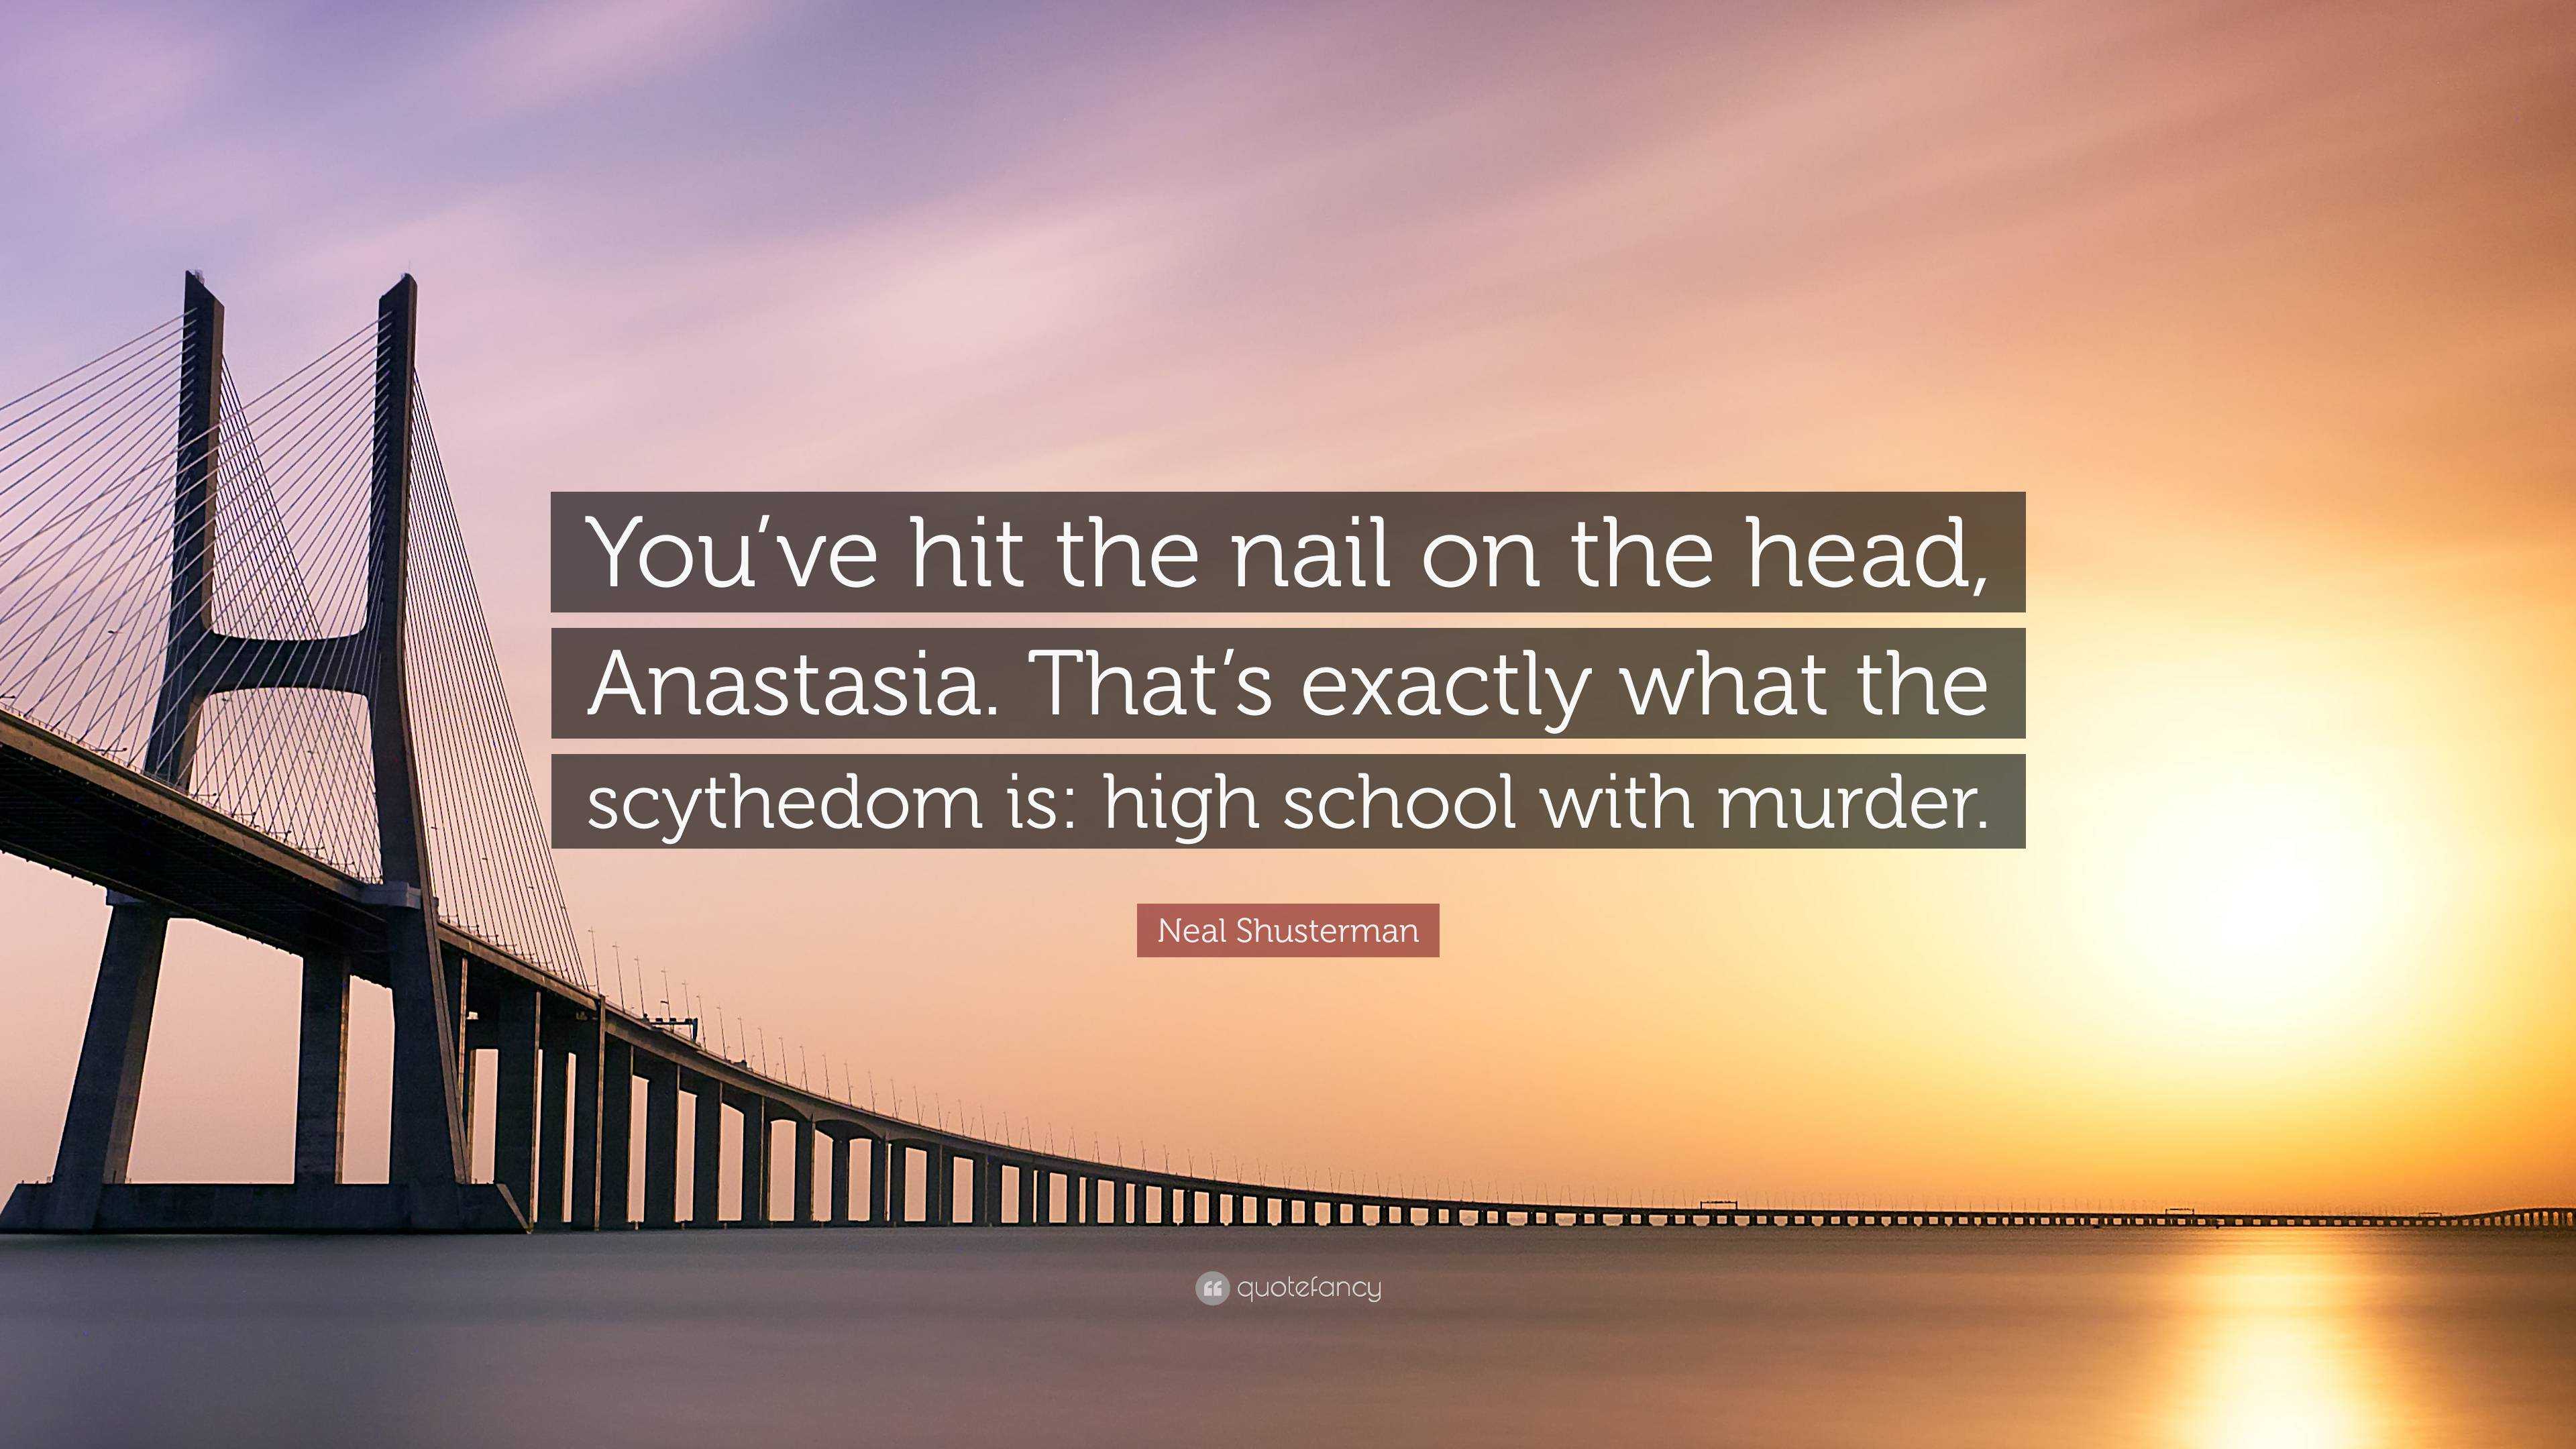 Neal Shusterman Quote: “You've hit the nail on the head, Anastasia. That's  exactly what the